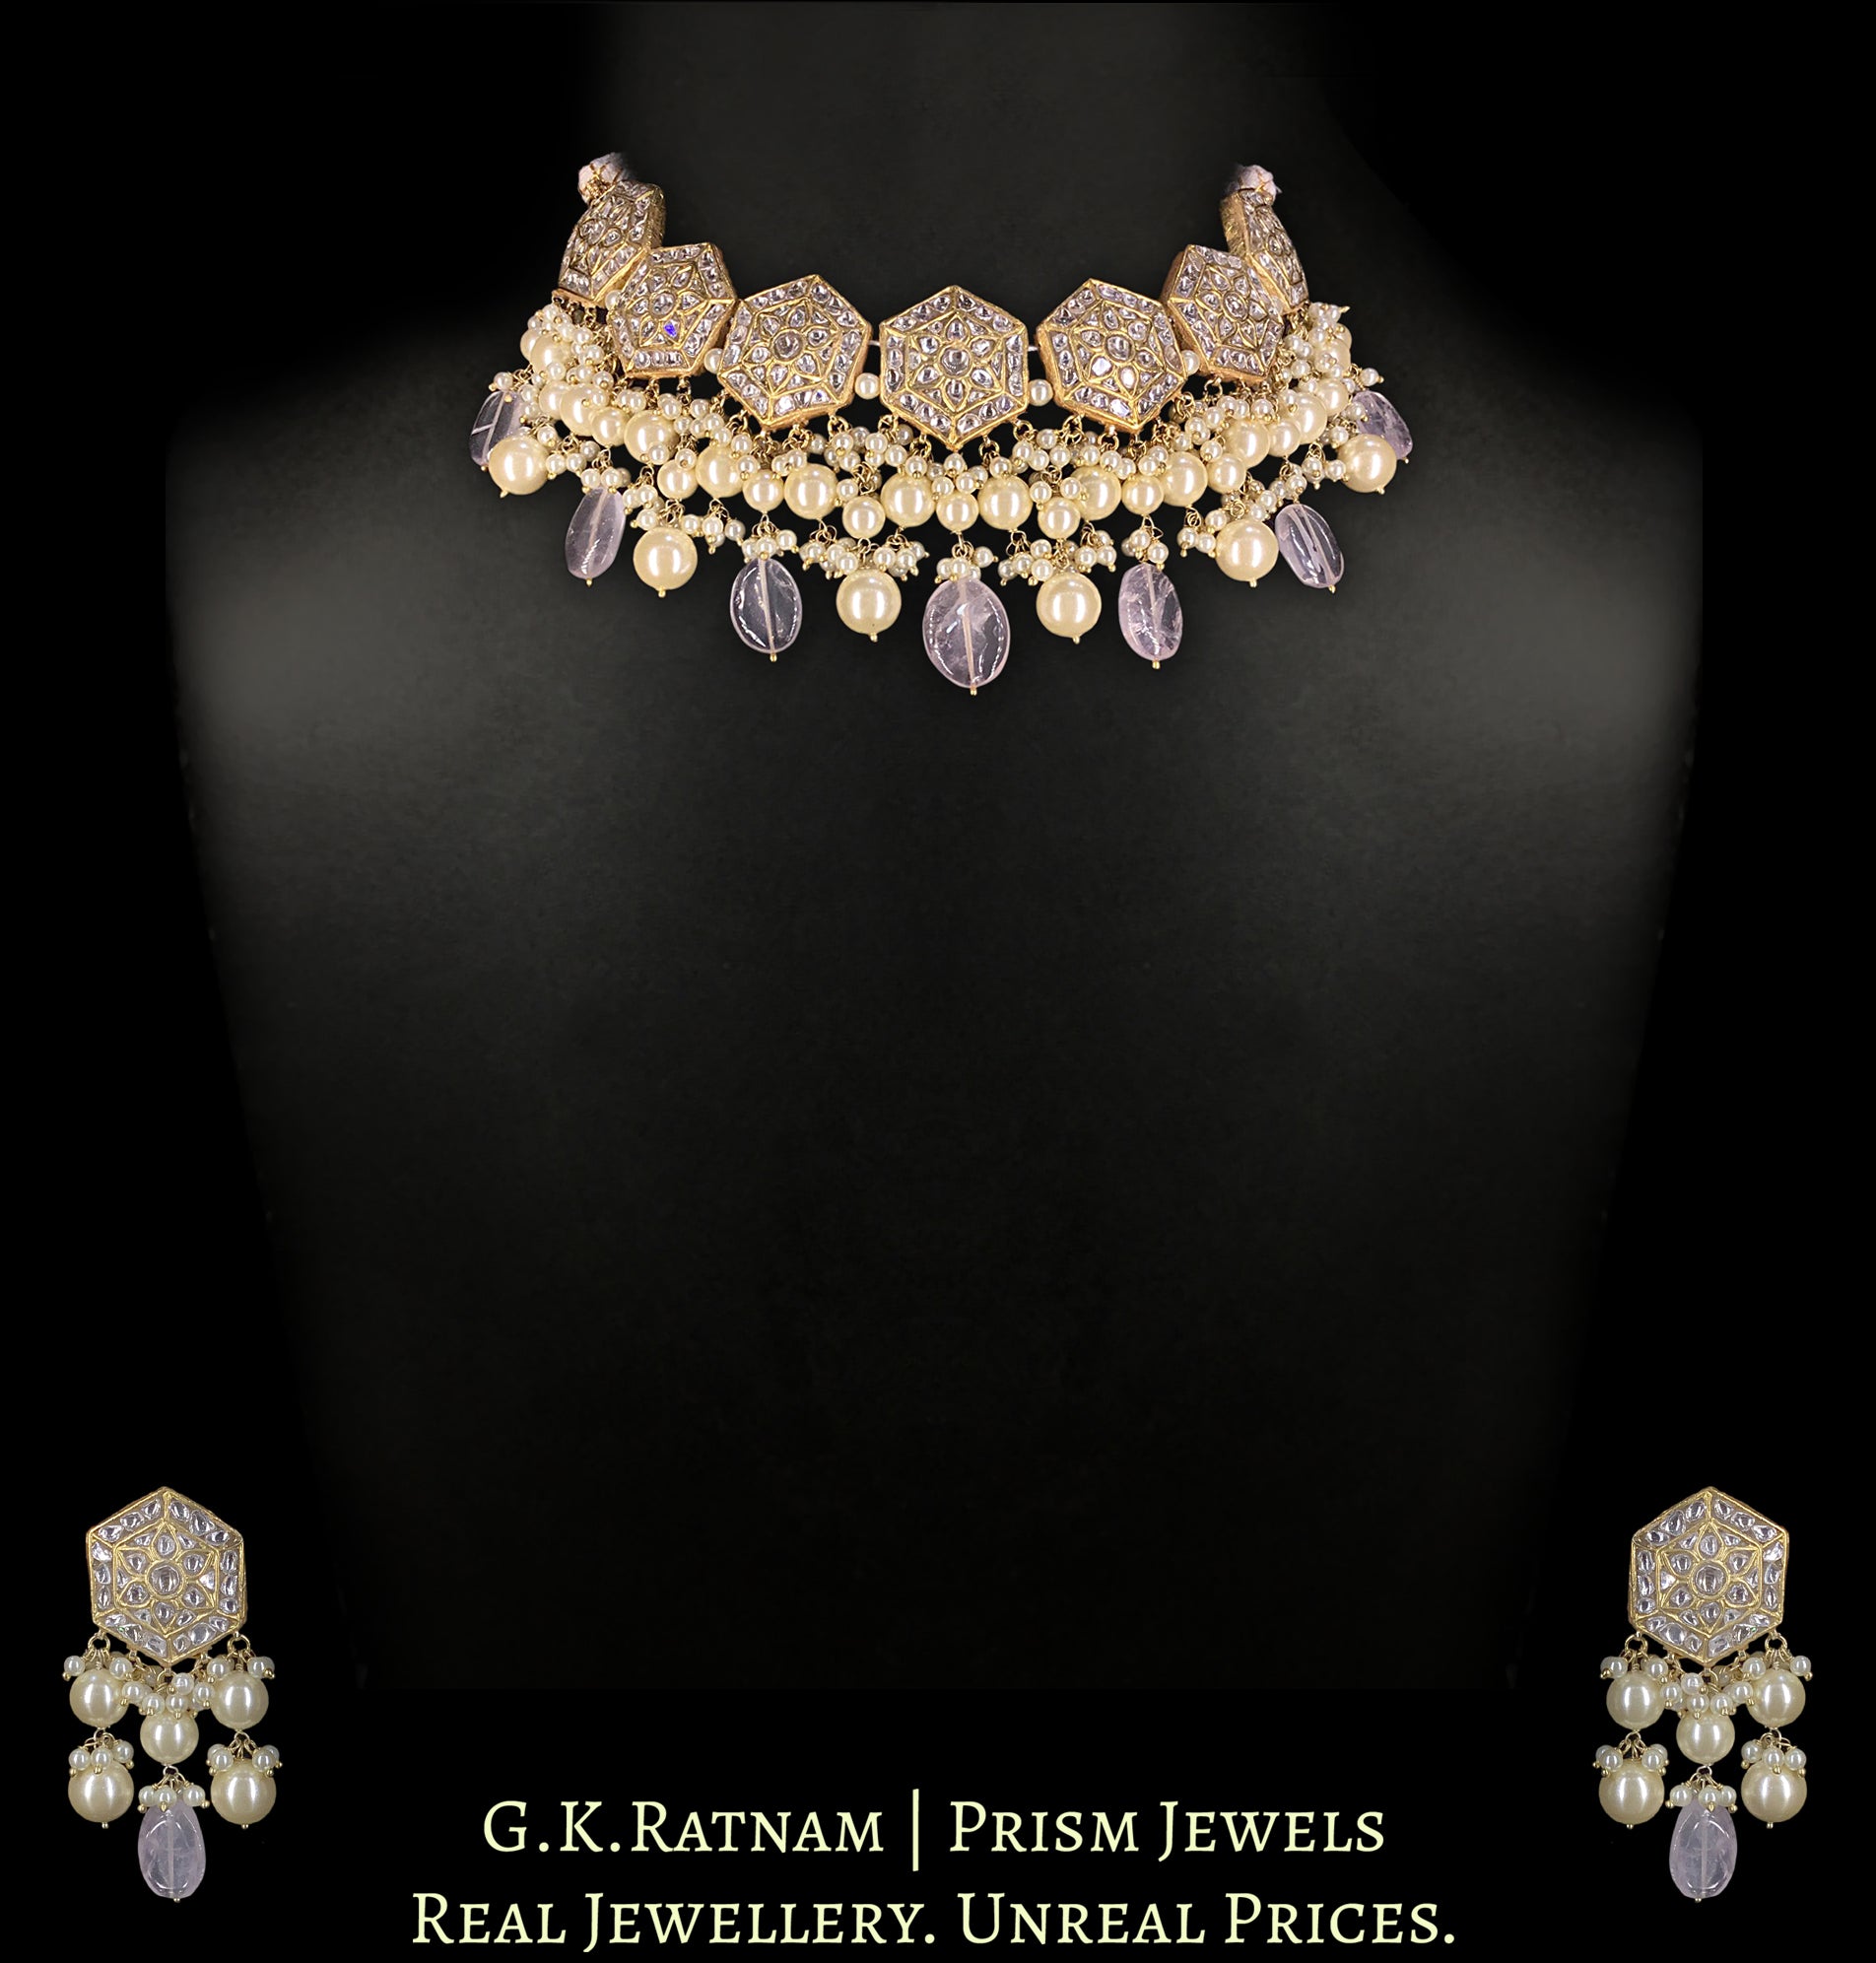 23k Gold and Diamond Polki Choker Necklace Set with Amethysts and Pearls